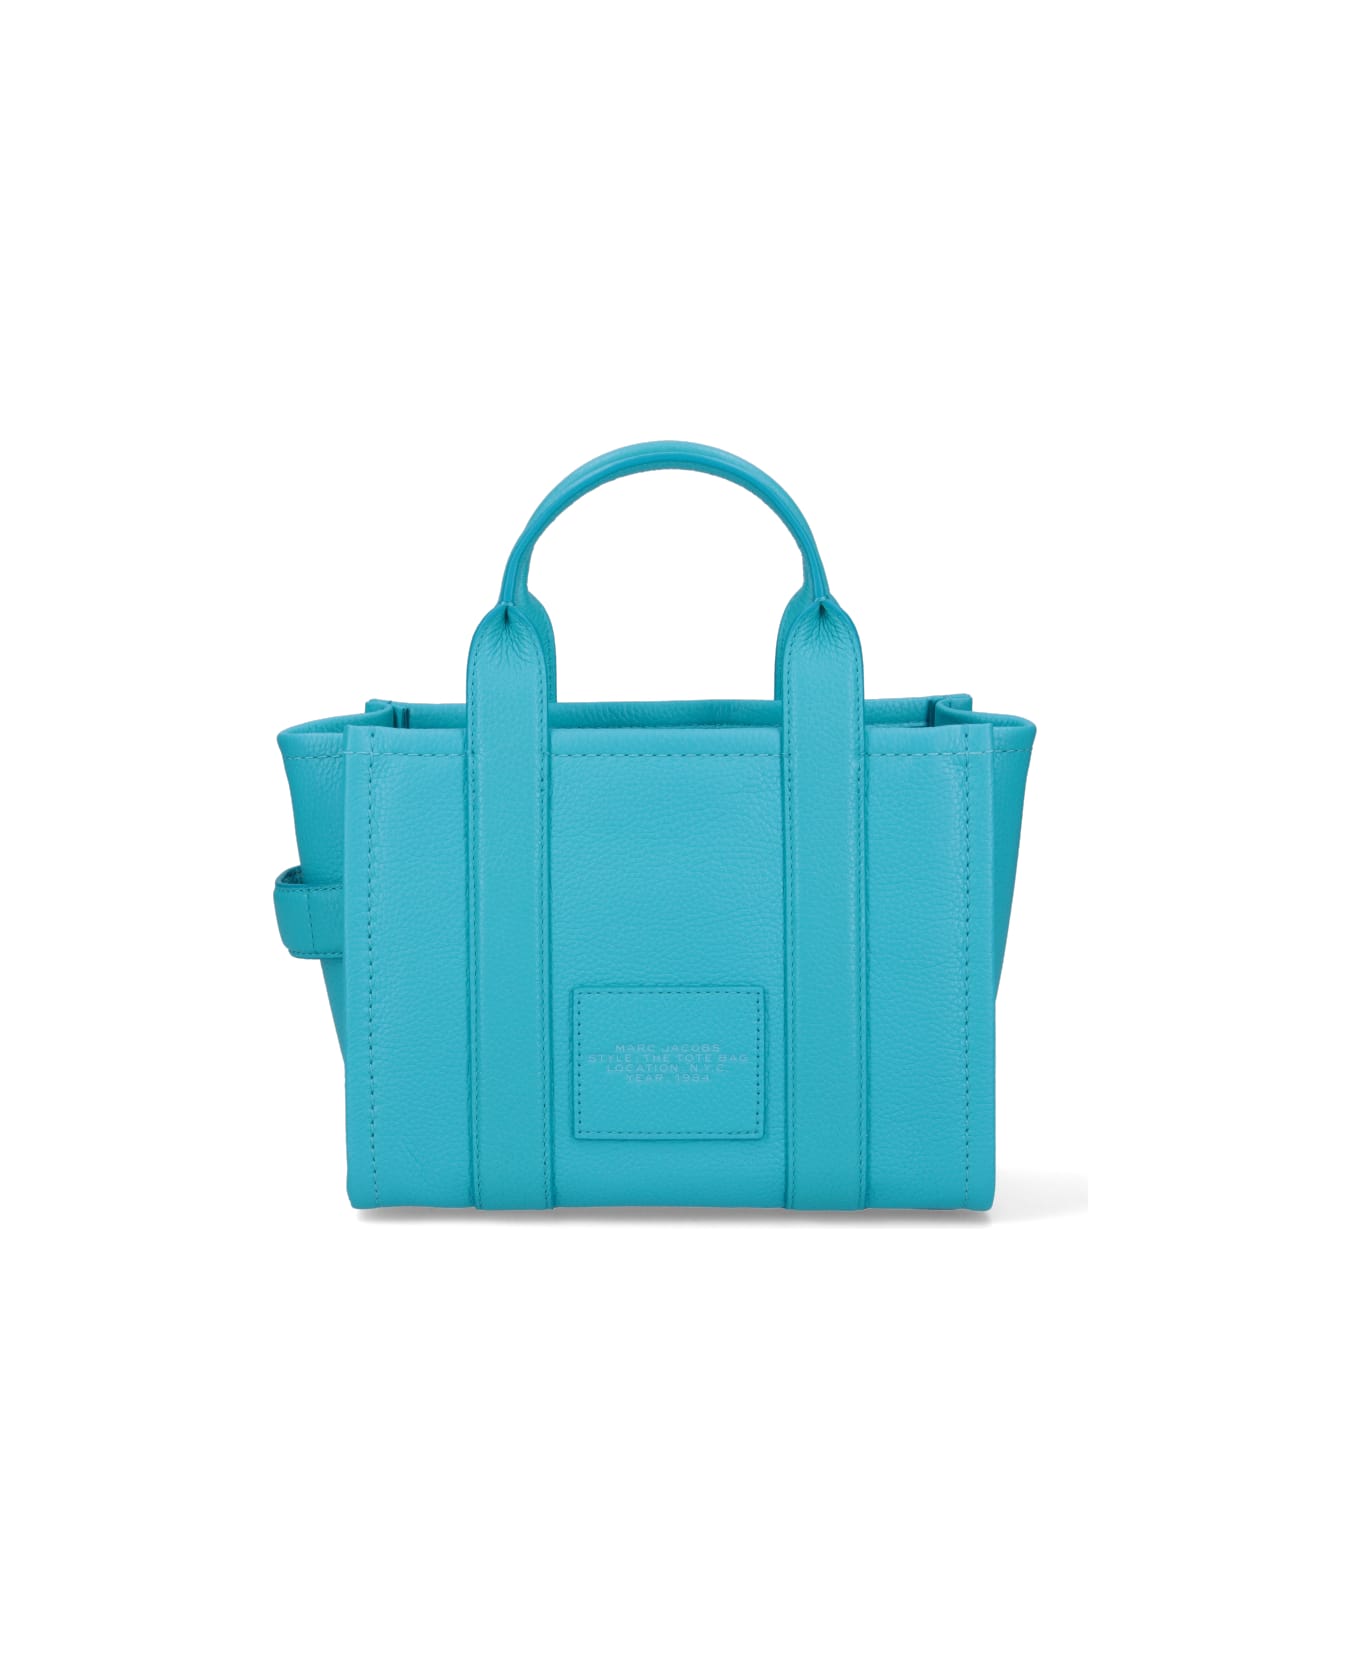 Marc Jacobs The Tote Bag - Light blue